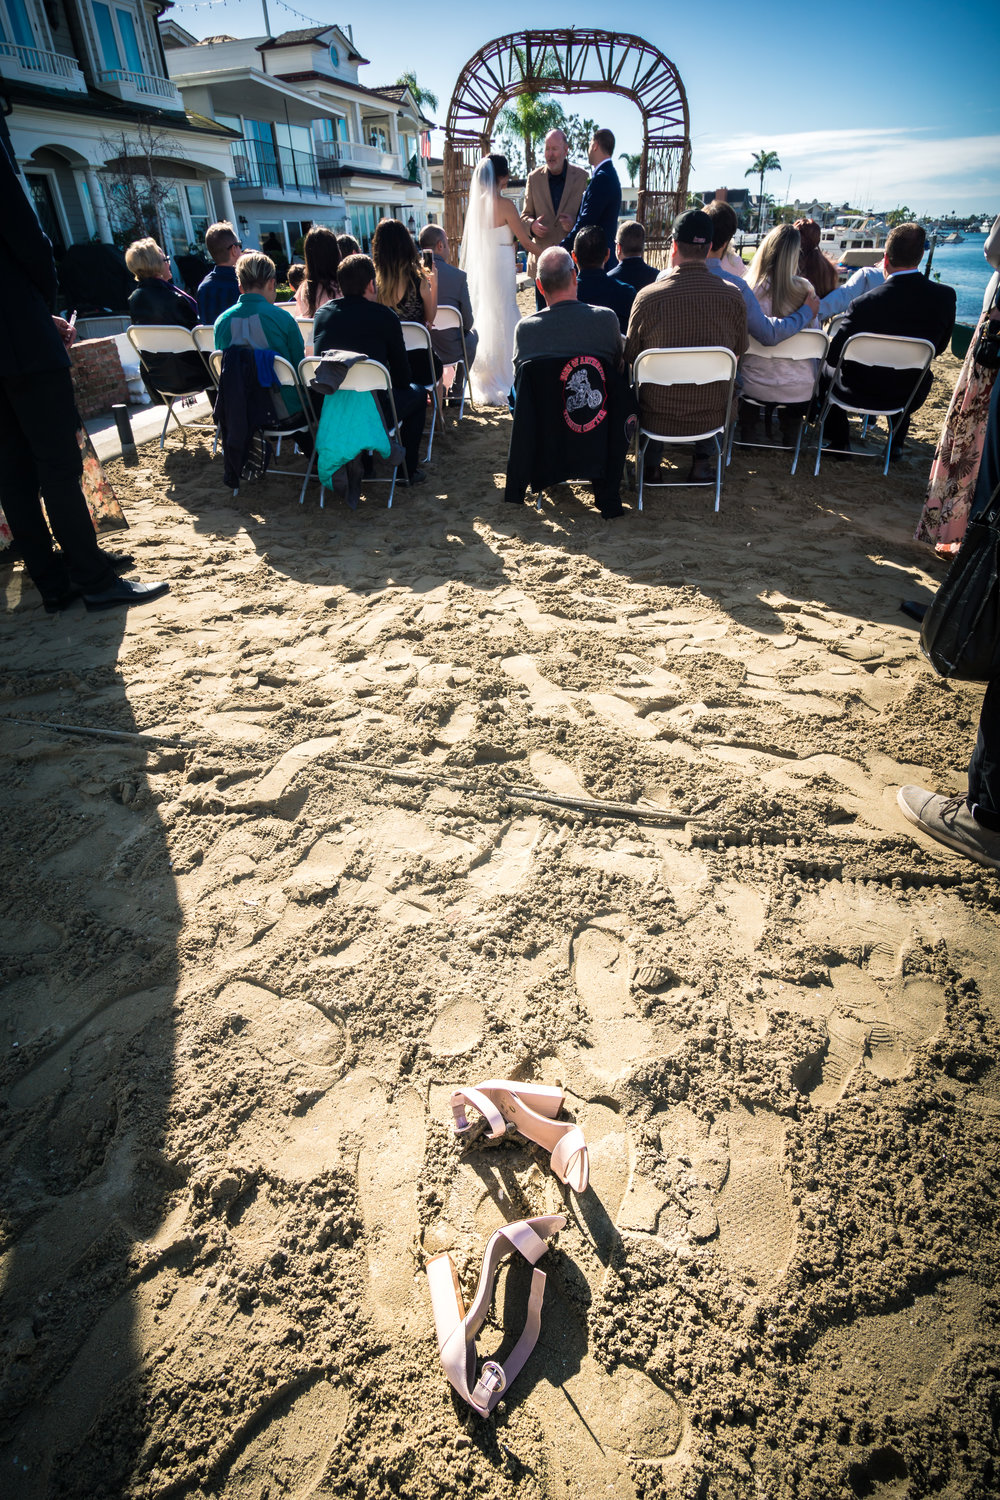 The bride shoes in the sand on the beach during the wedding ceremony on Balboa Island